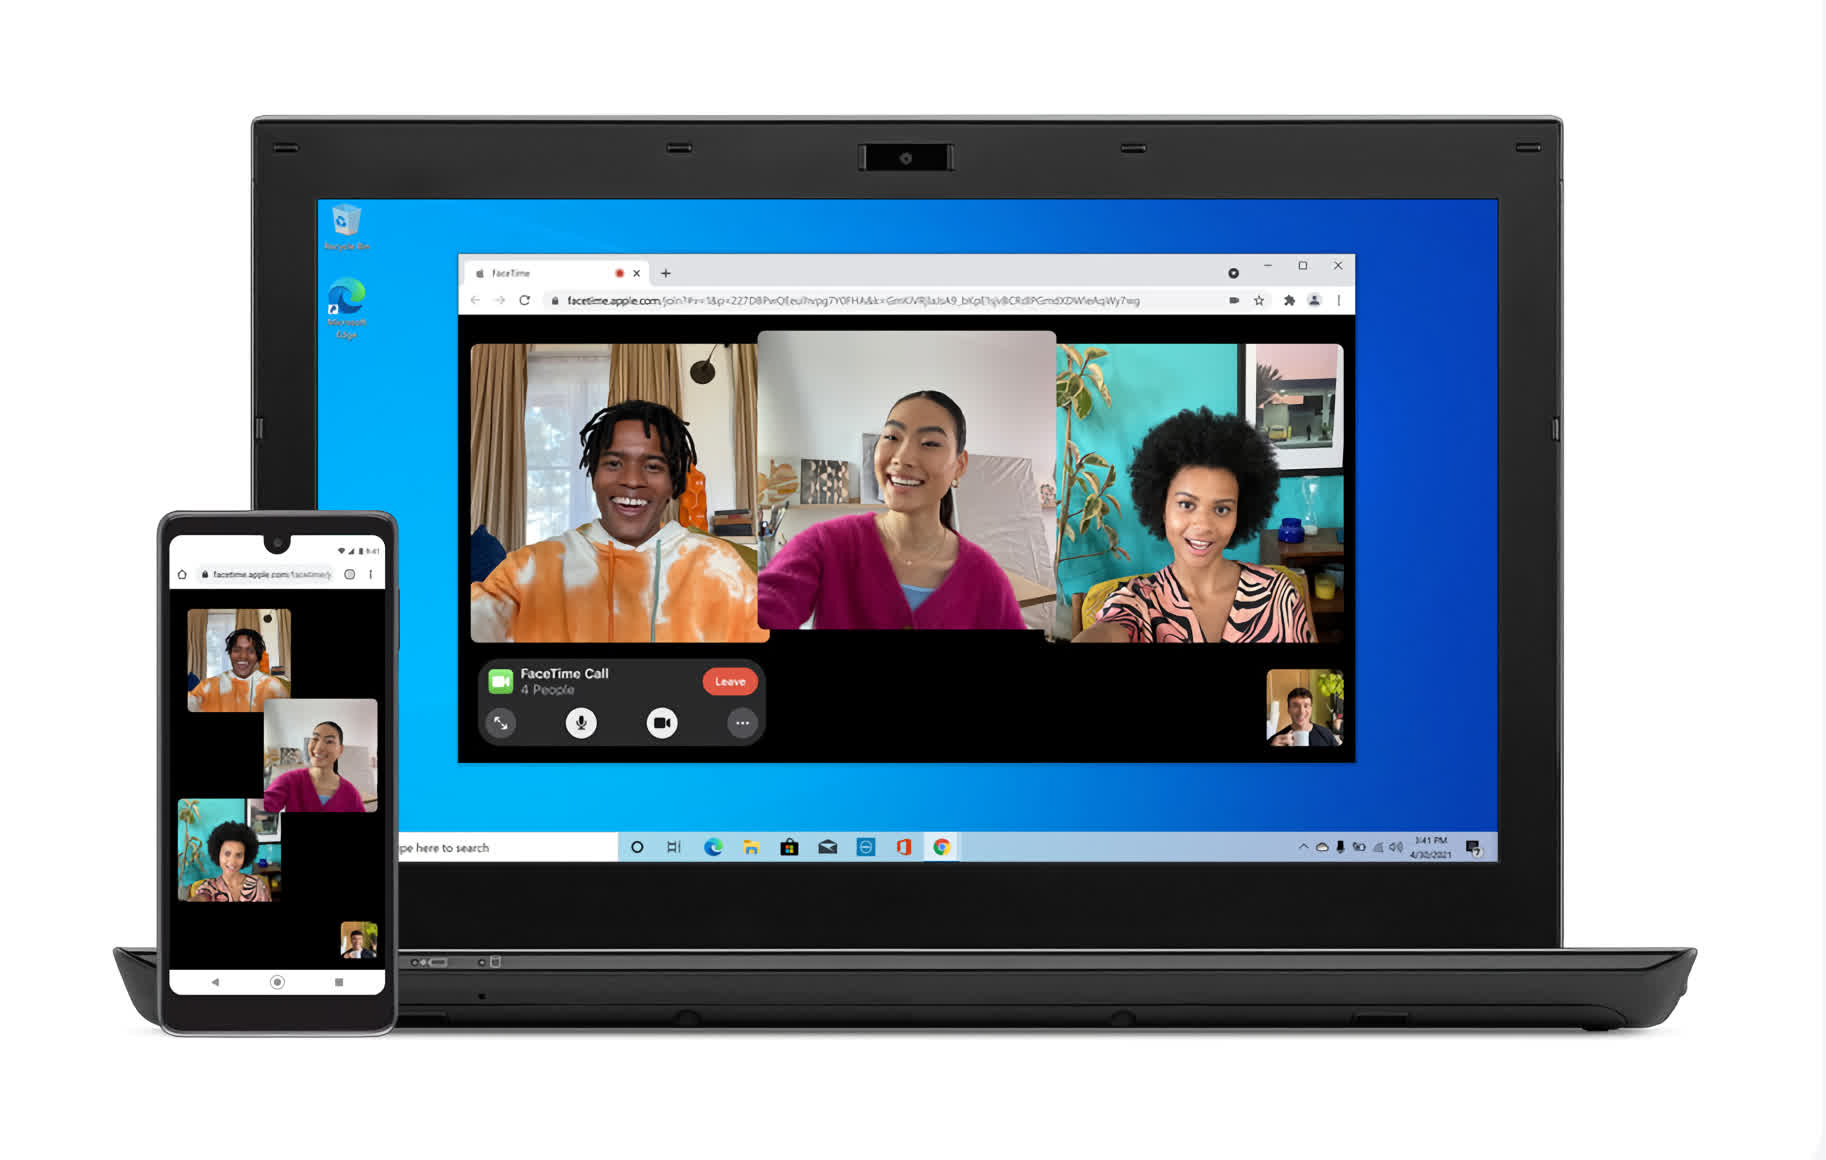 Apple is bringing FaceTime to Android and Windows... kind of